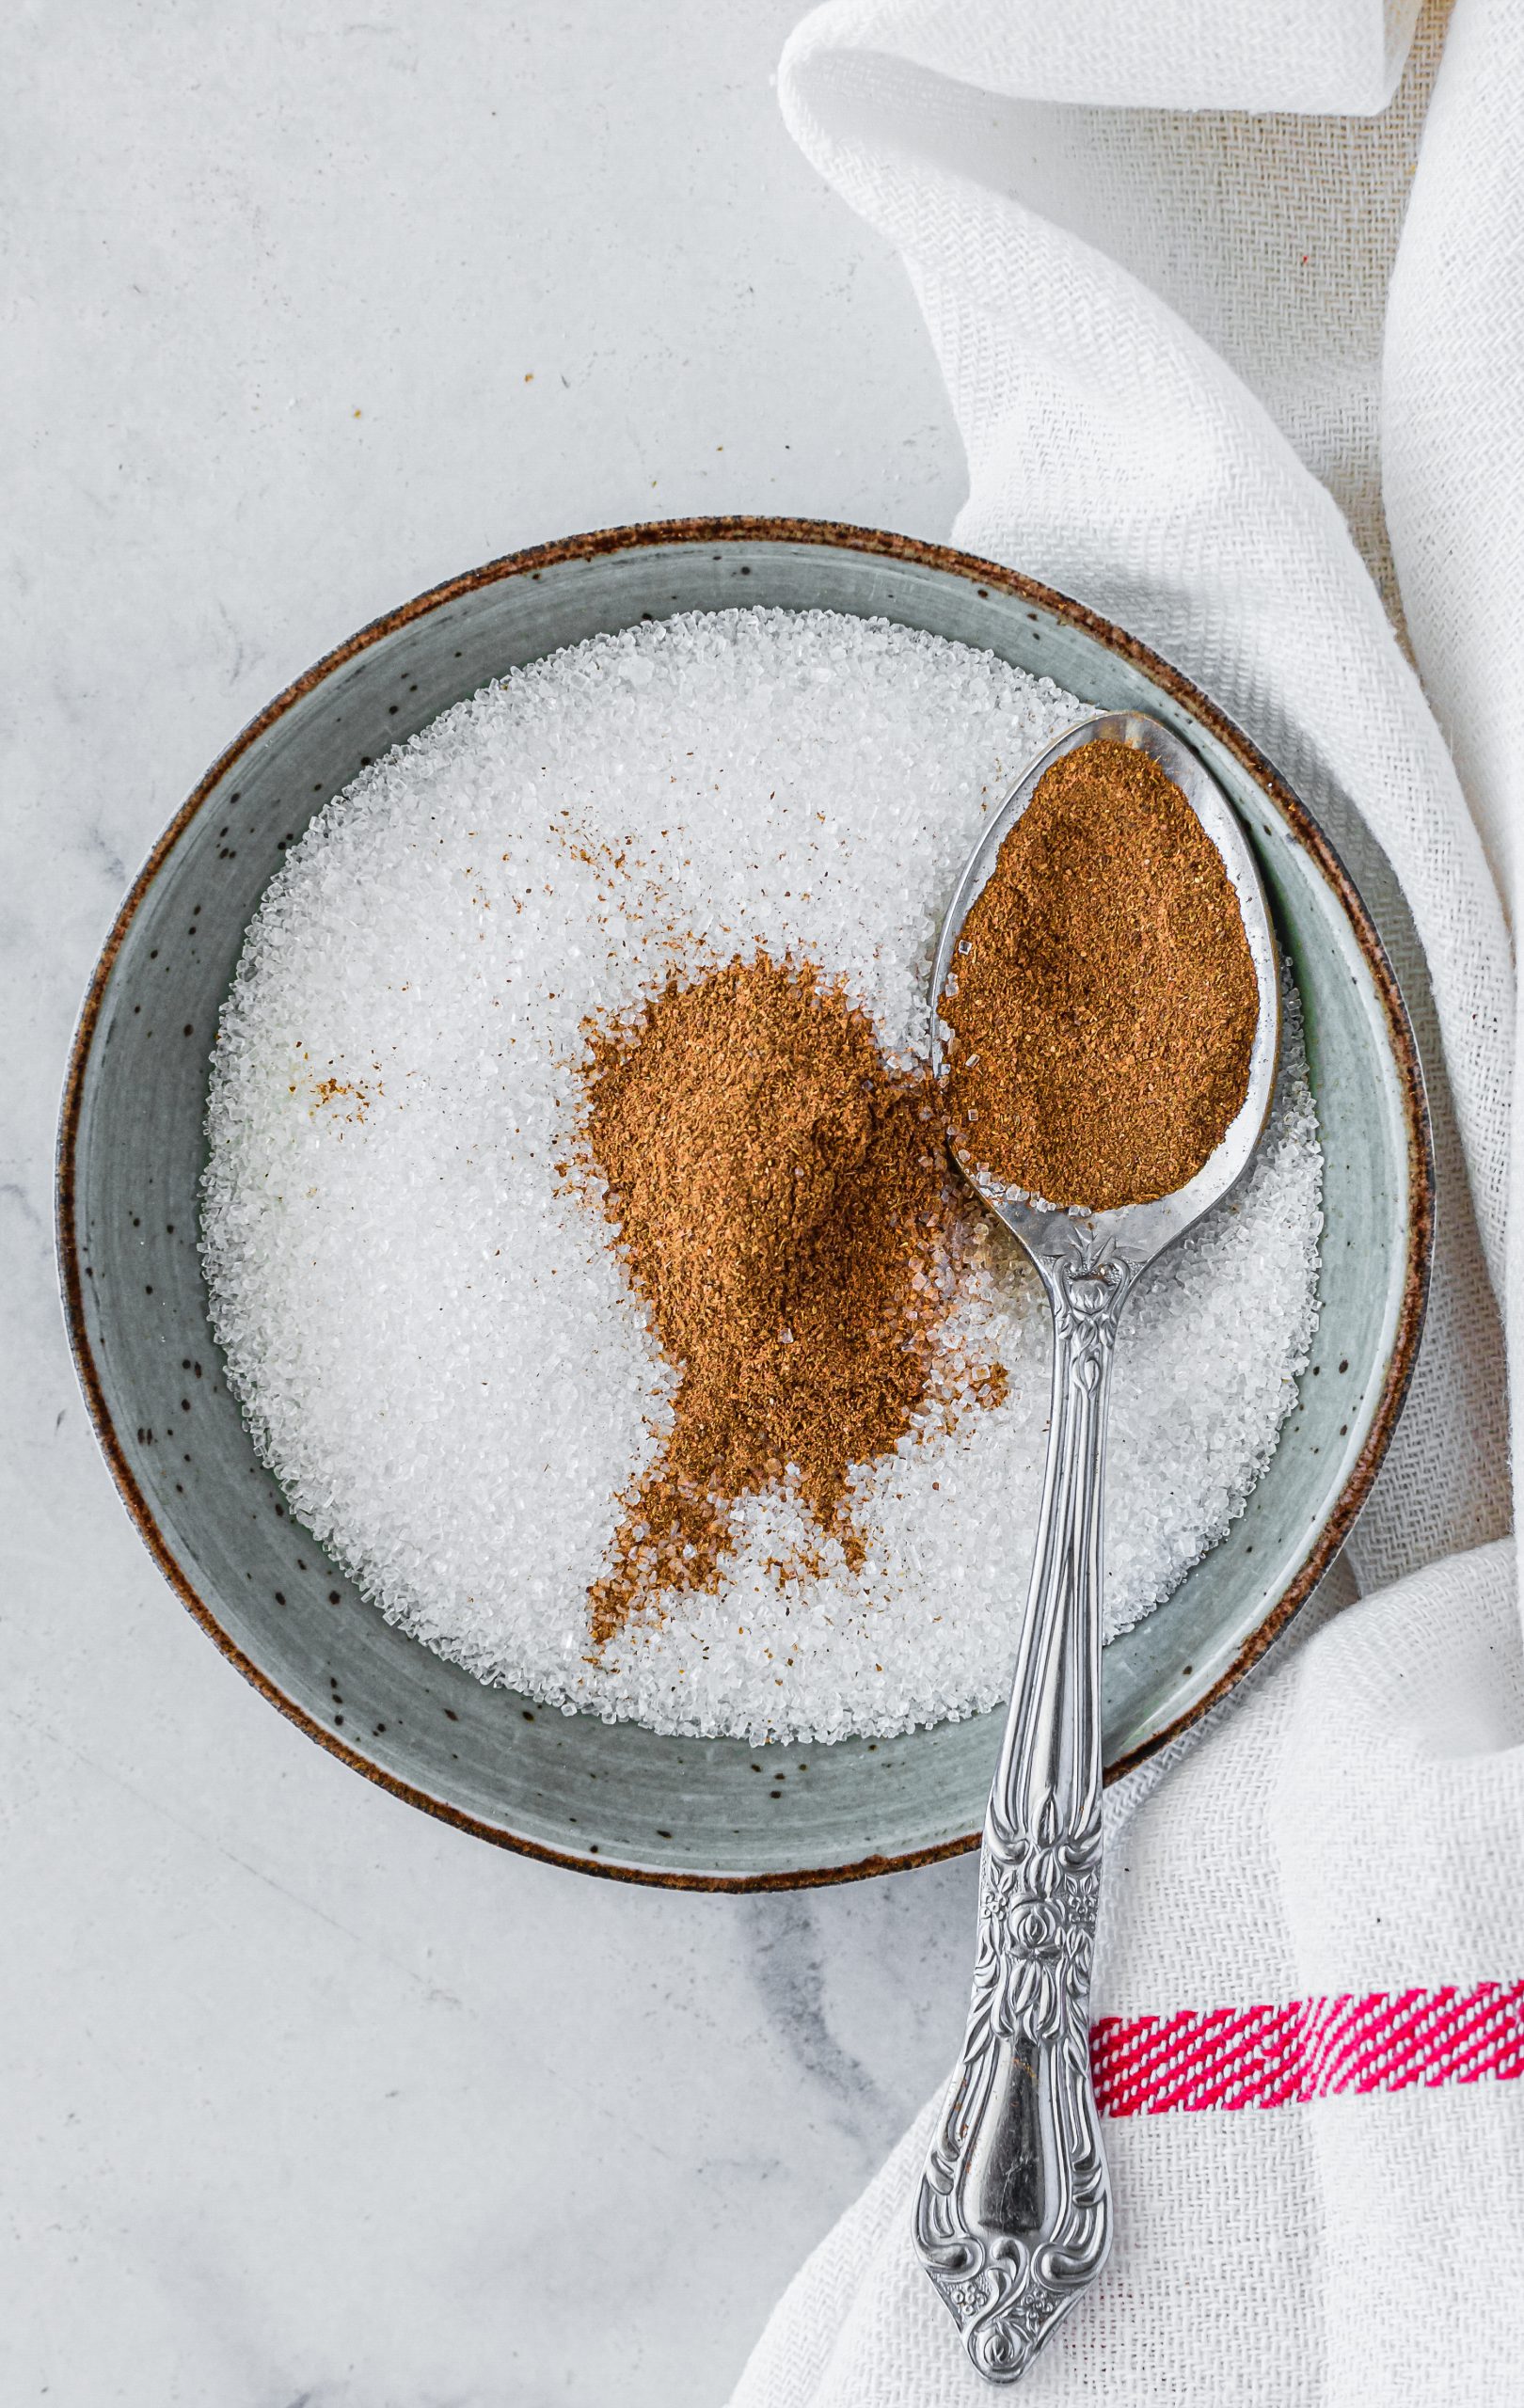 Mix together the sugar and cinnamon for the topping in a separate bowl. 